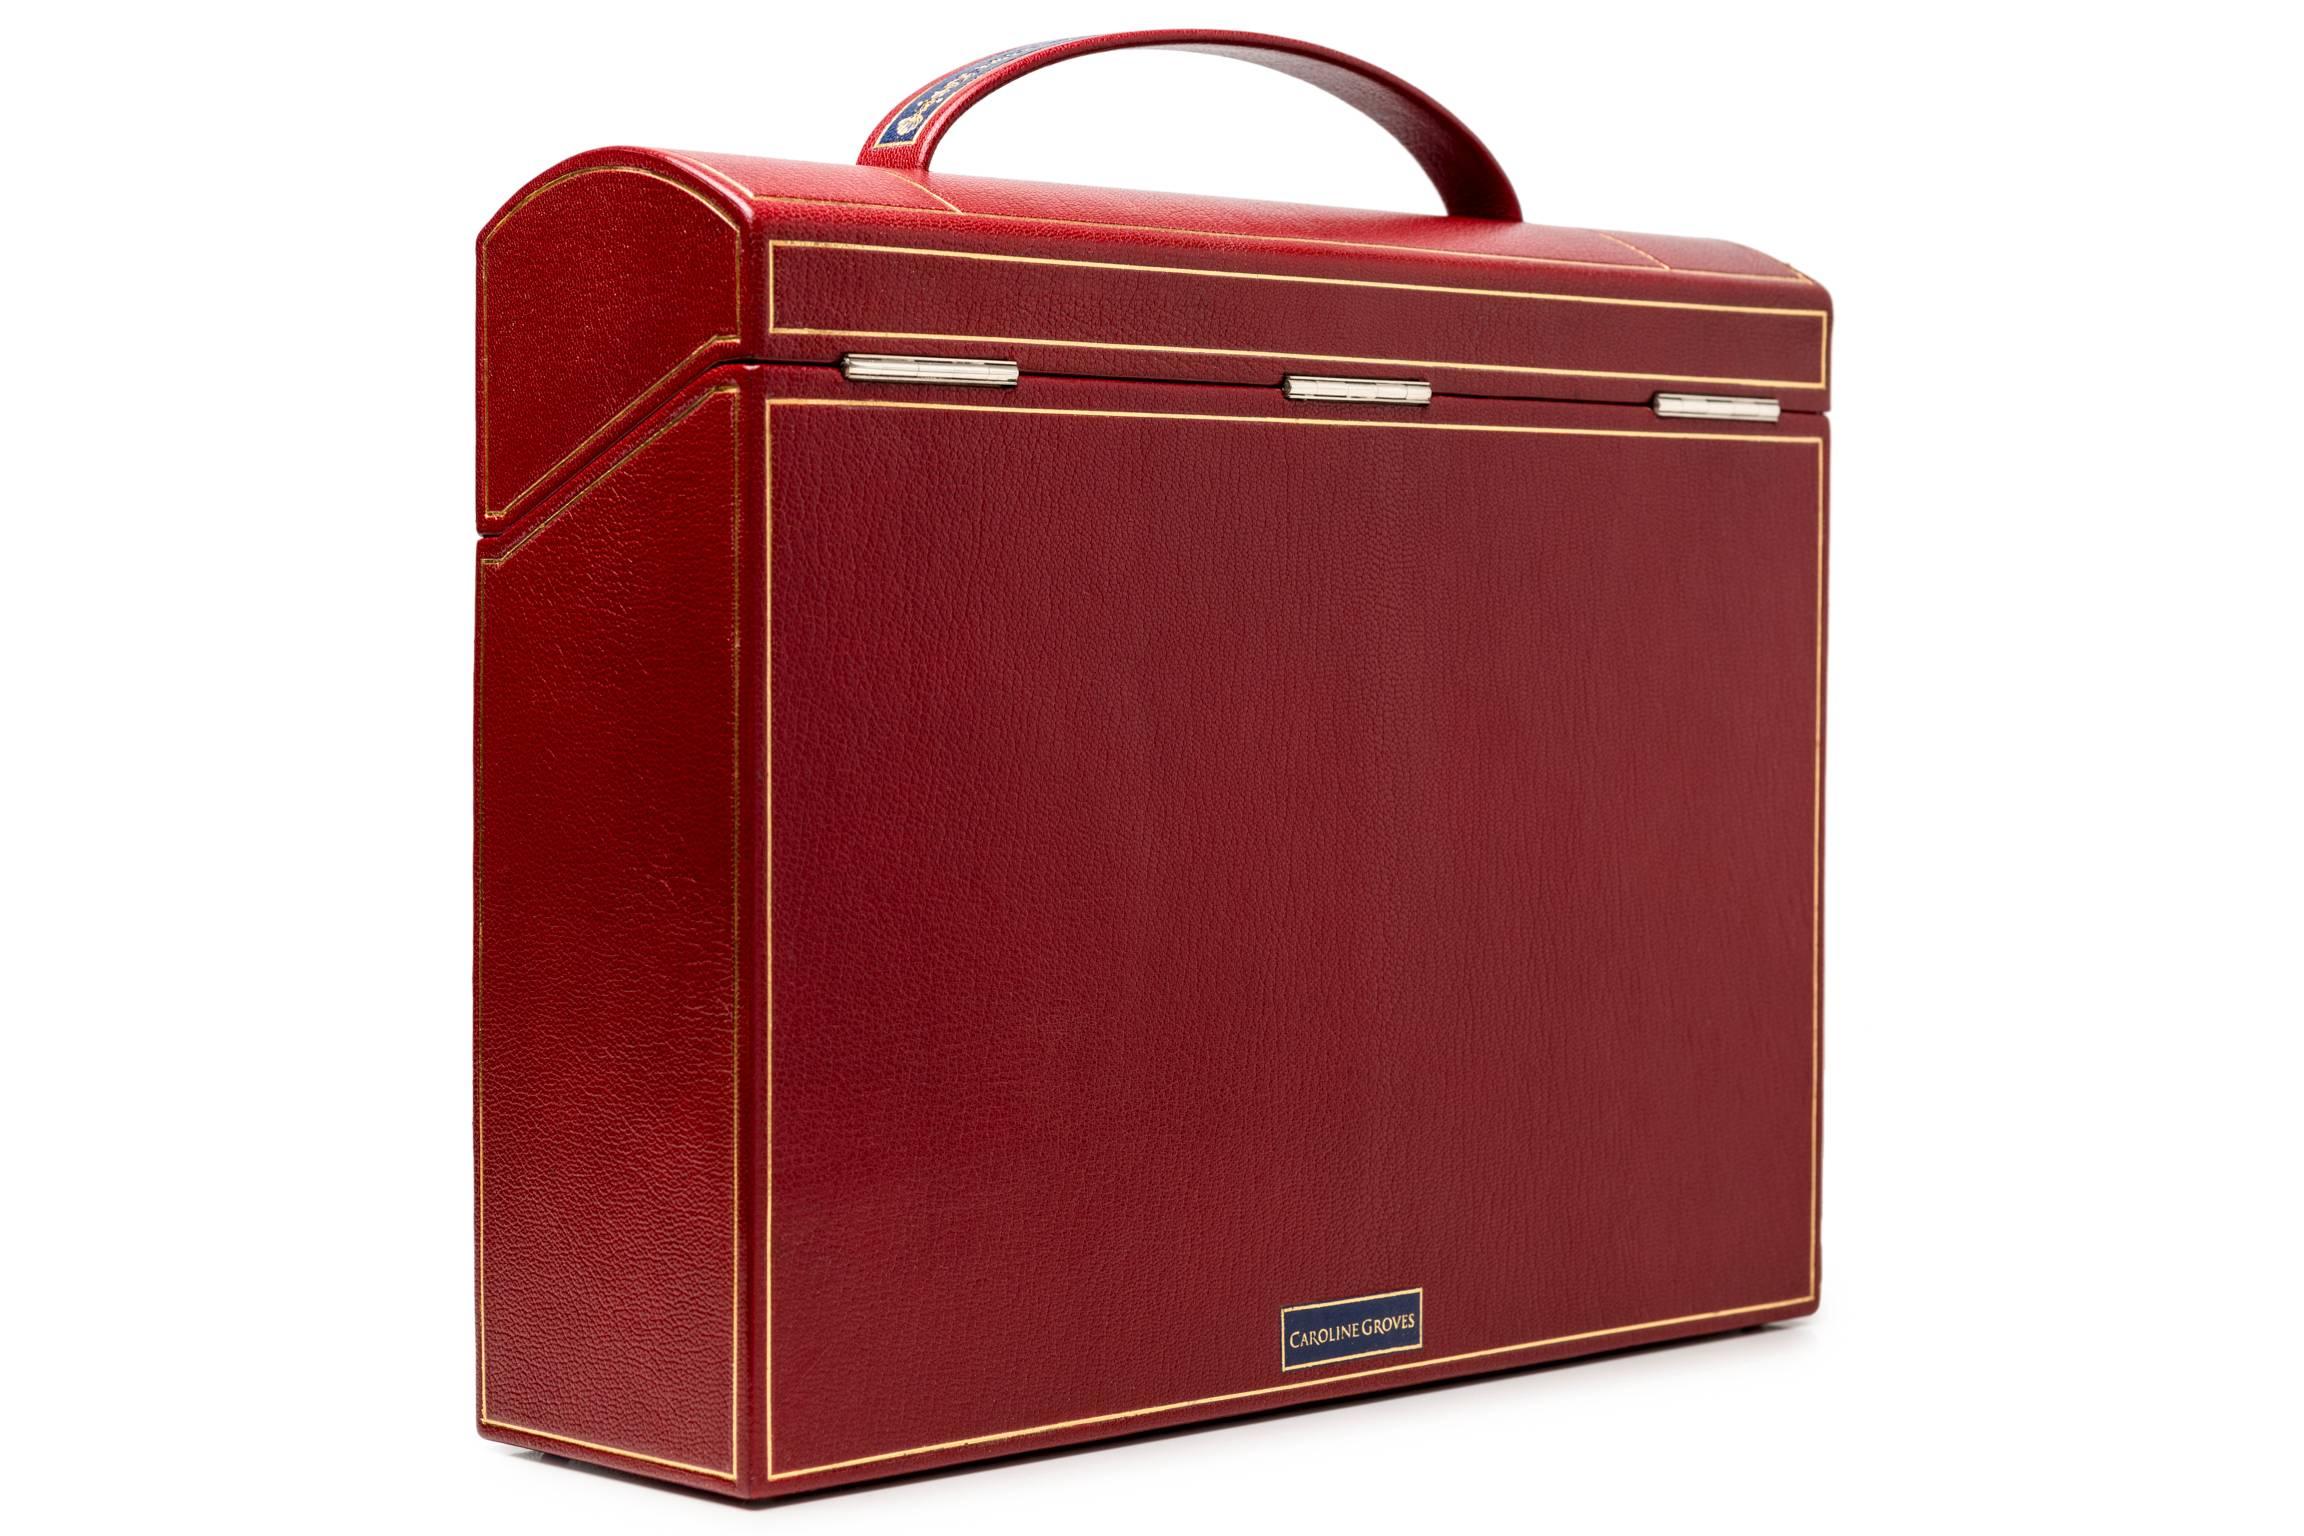 The Cleeve Case is inspired by a late Georgian portable writing desk. The red goatskin case over a carcass of wood has inlays of green and blue with over fifty hours of hand tooling by Trevor Lloyd with 22 carat gold. At the corners are sapphires